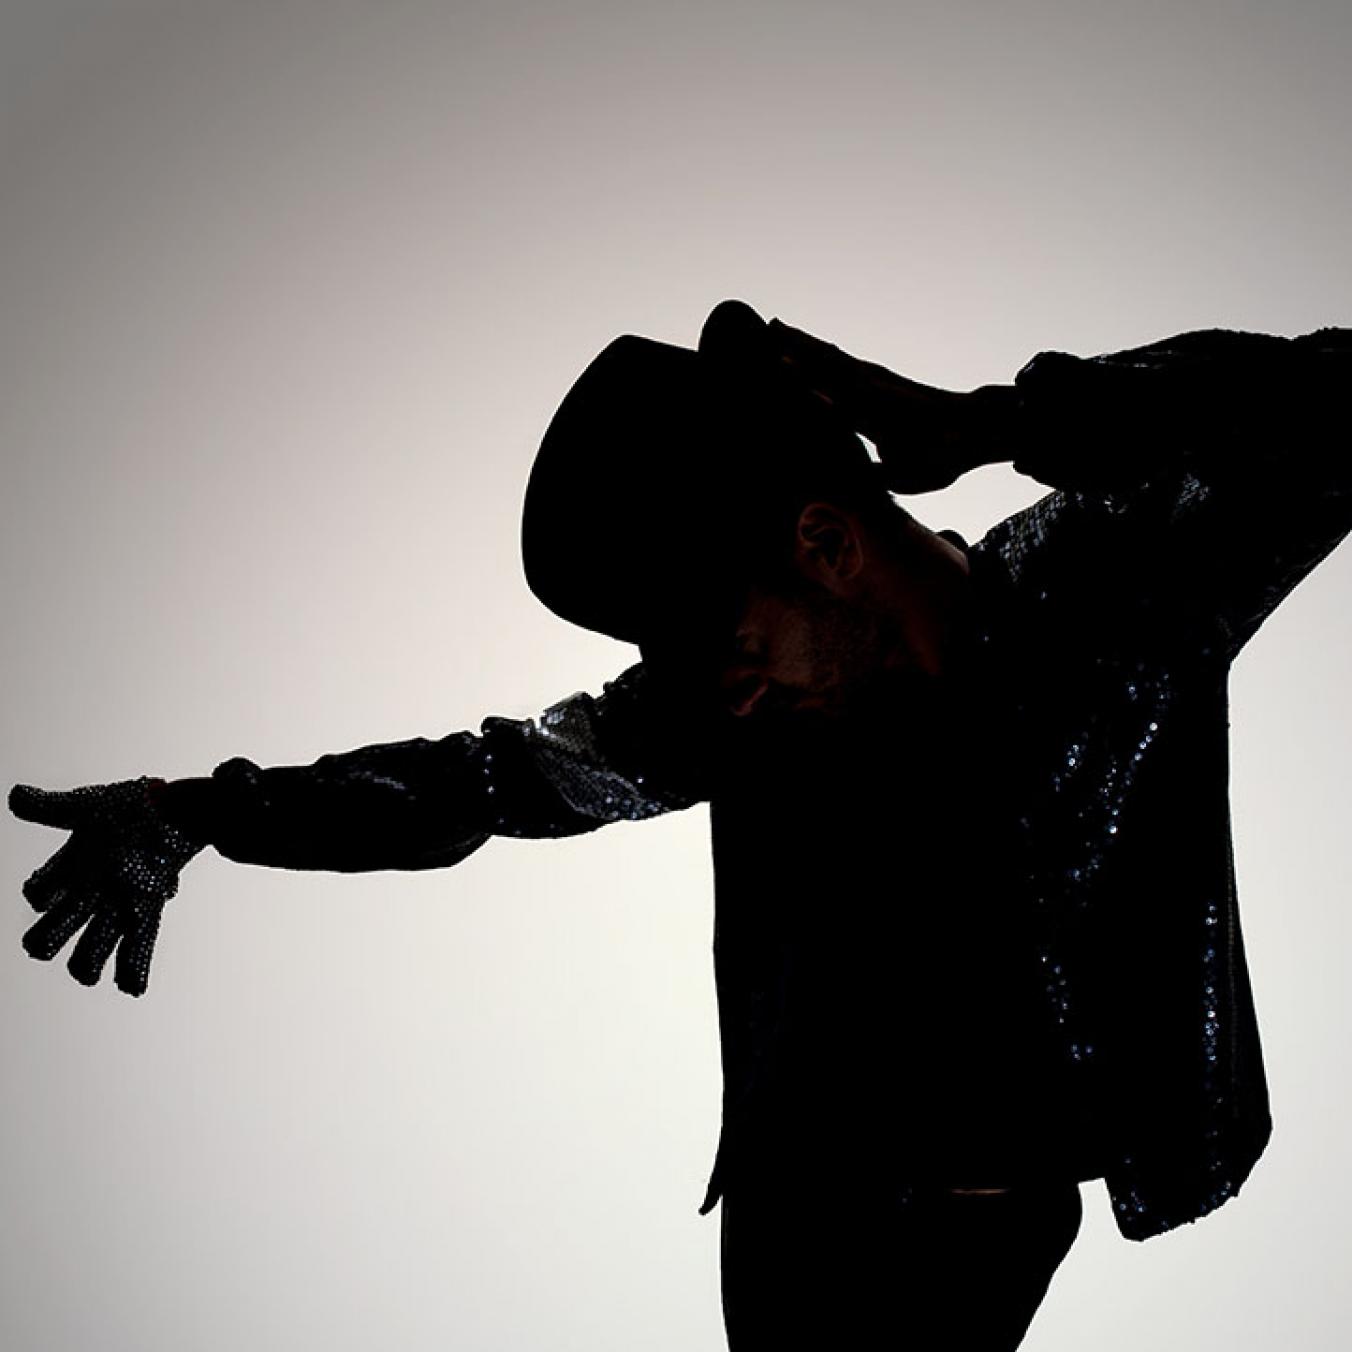 The King Of Pop Released a "Thriller"